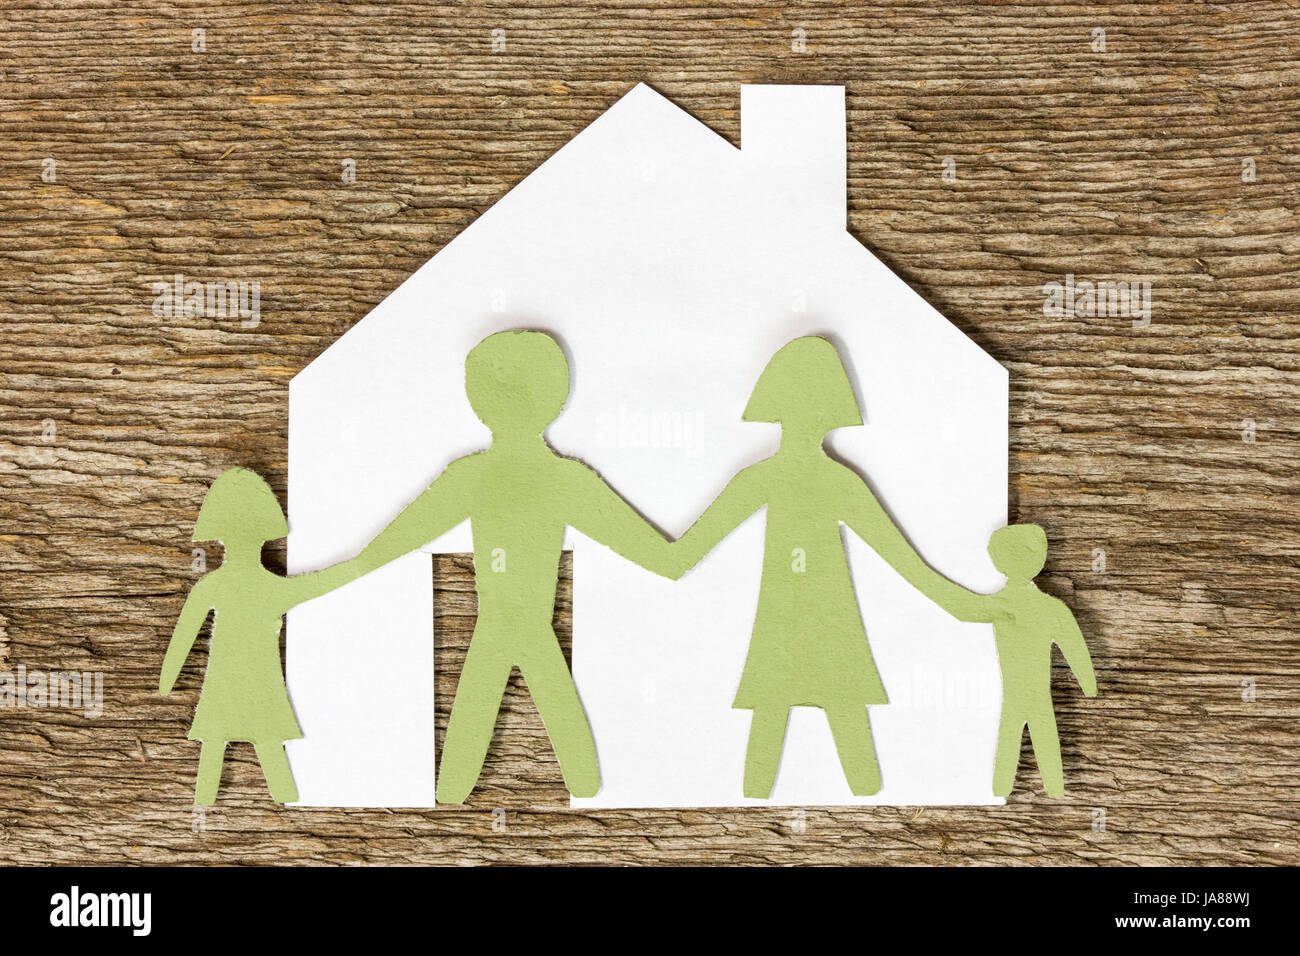 humans, human beings, people, folk, persons, human, human being, house, Stock Photo